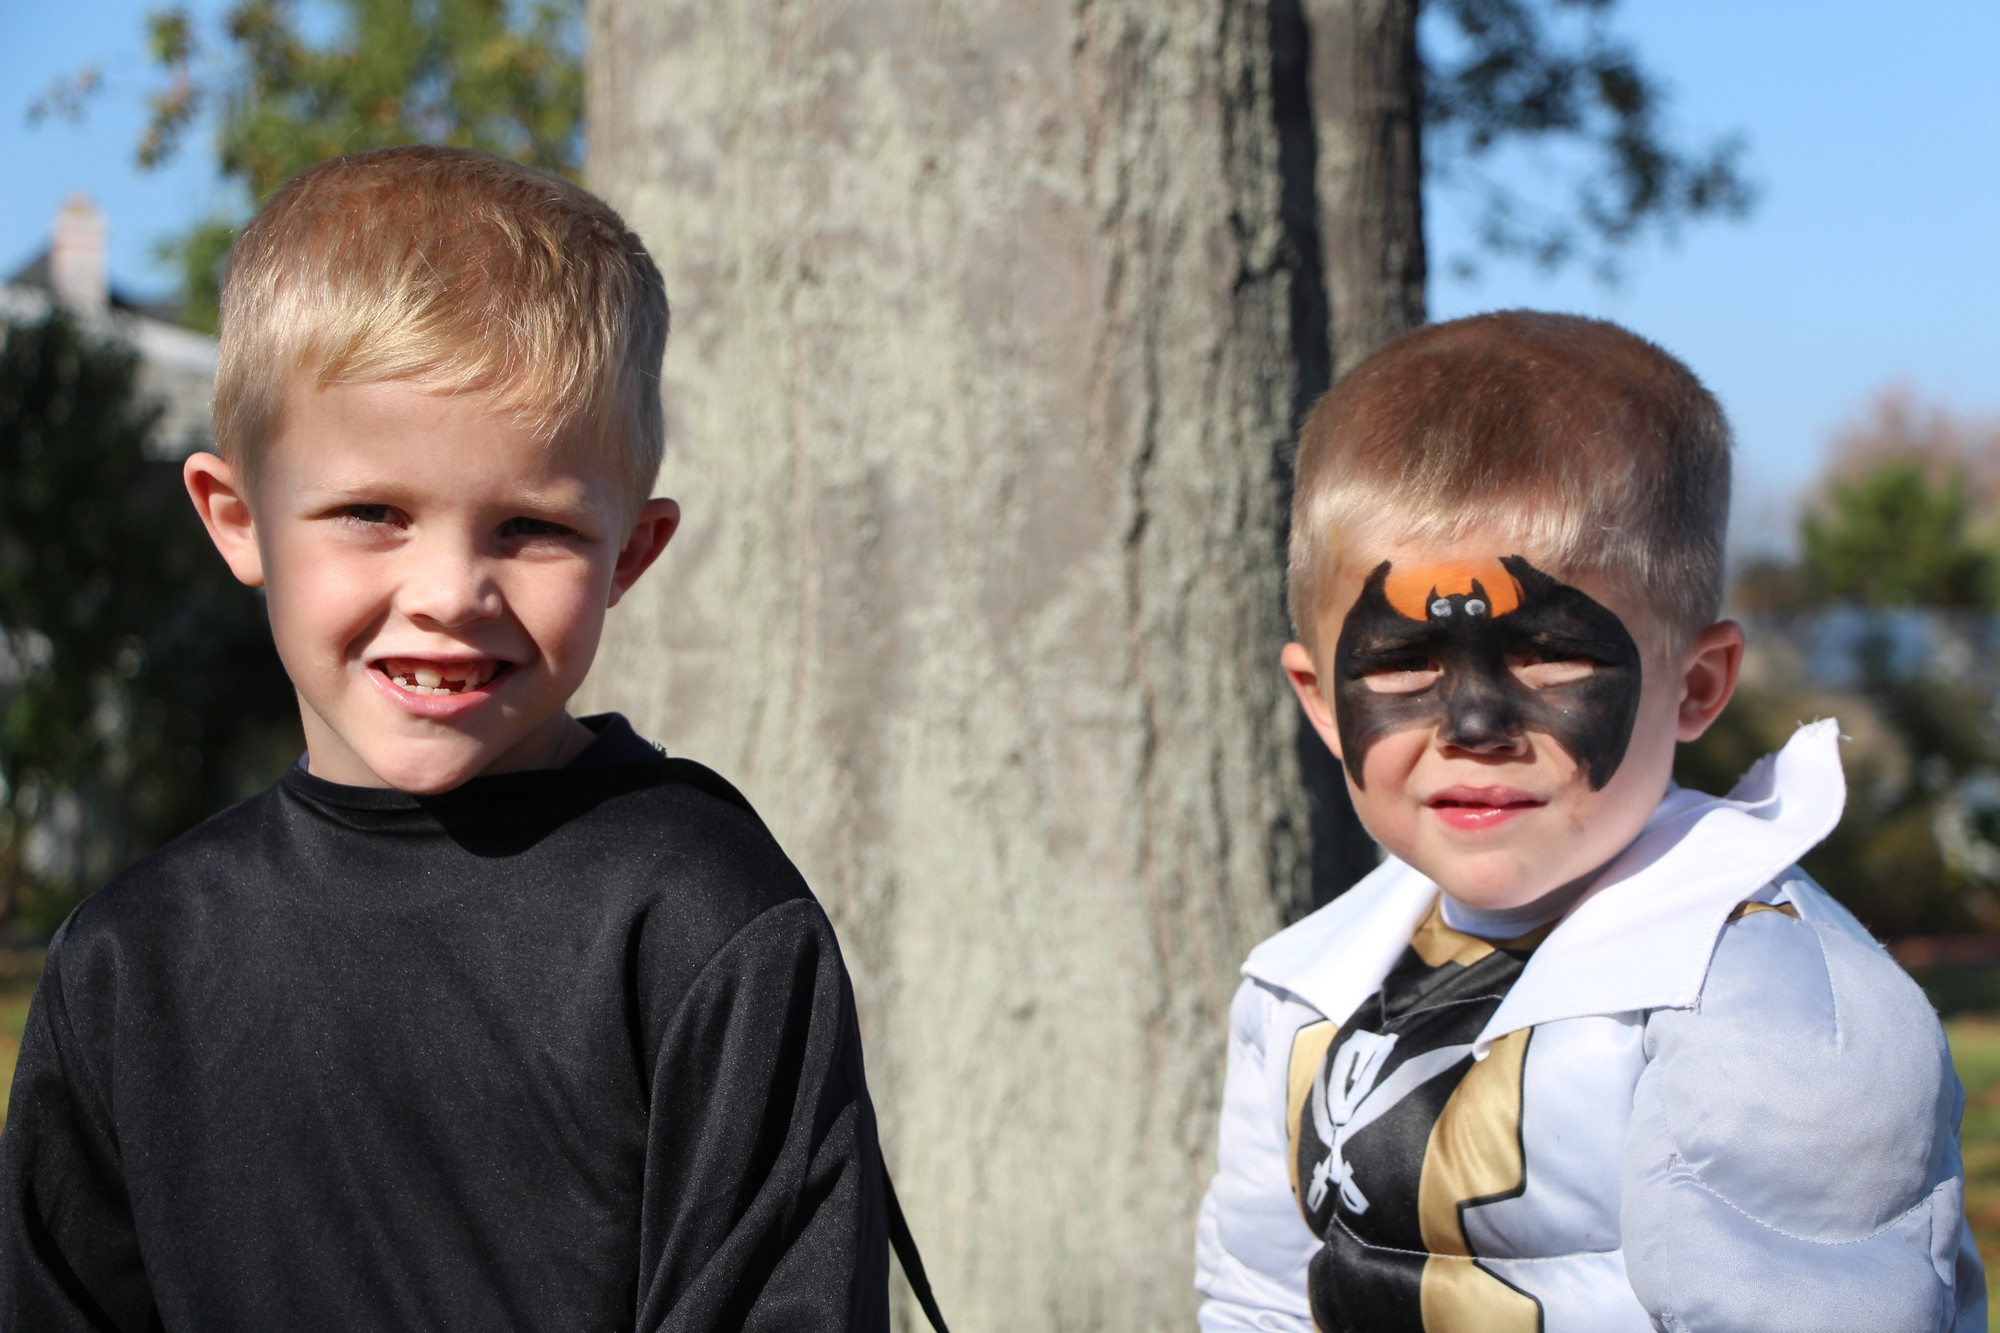 Dylan Roberts 6, left, with his younger brother Kolby 5, had a great time at the Baldwin Halloween Fest.